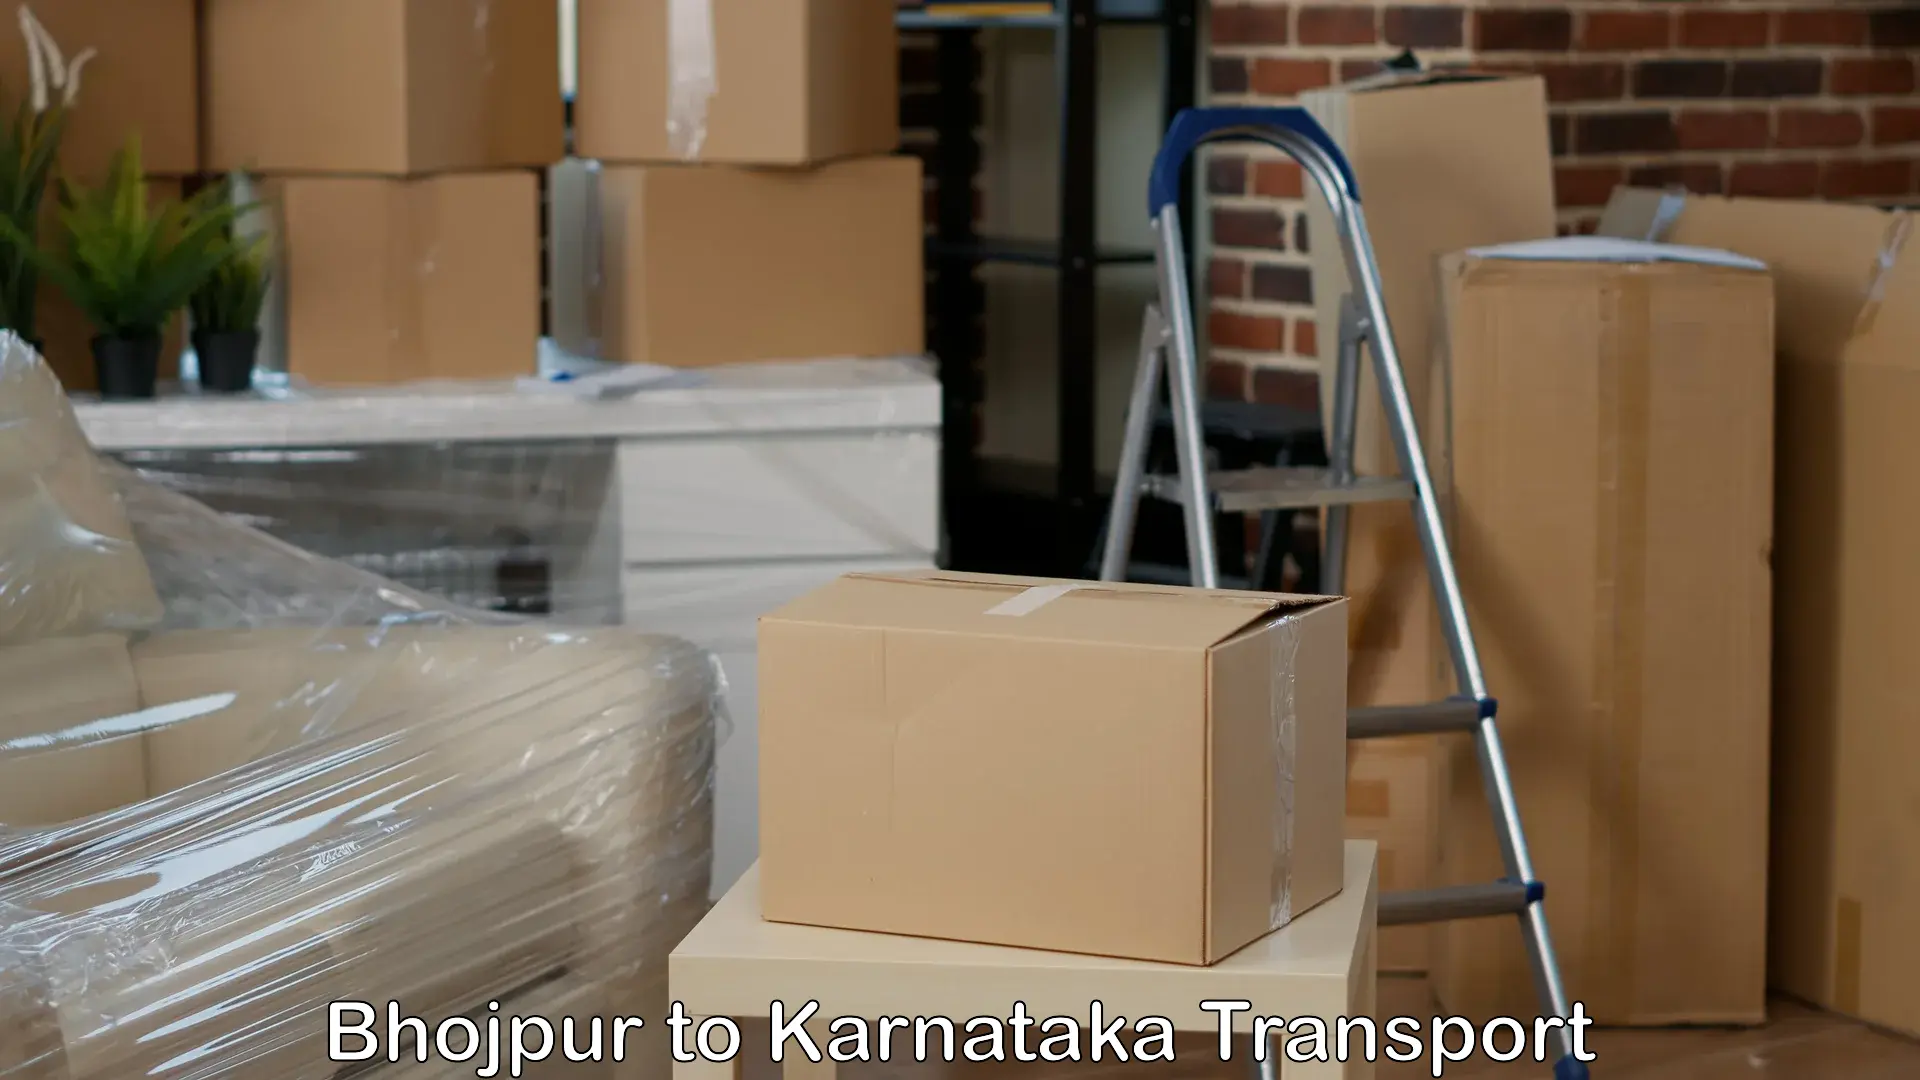 Parcel transport services Bhojpur to Dharmasthala